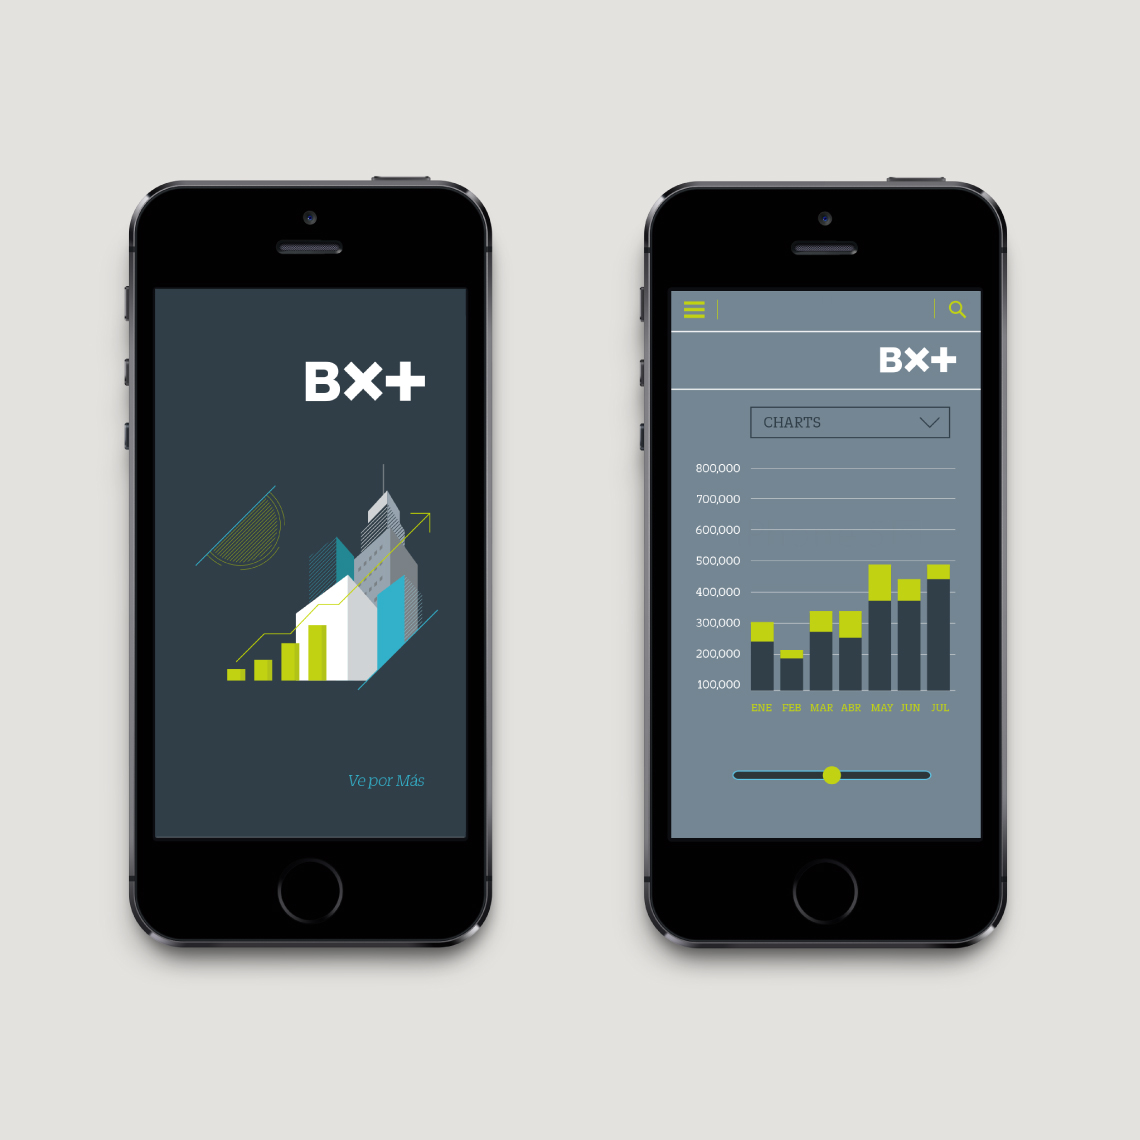 Two mobile phones with examples of the brand identity applied to a web page for BX+